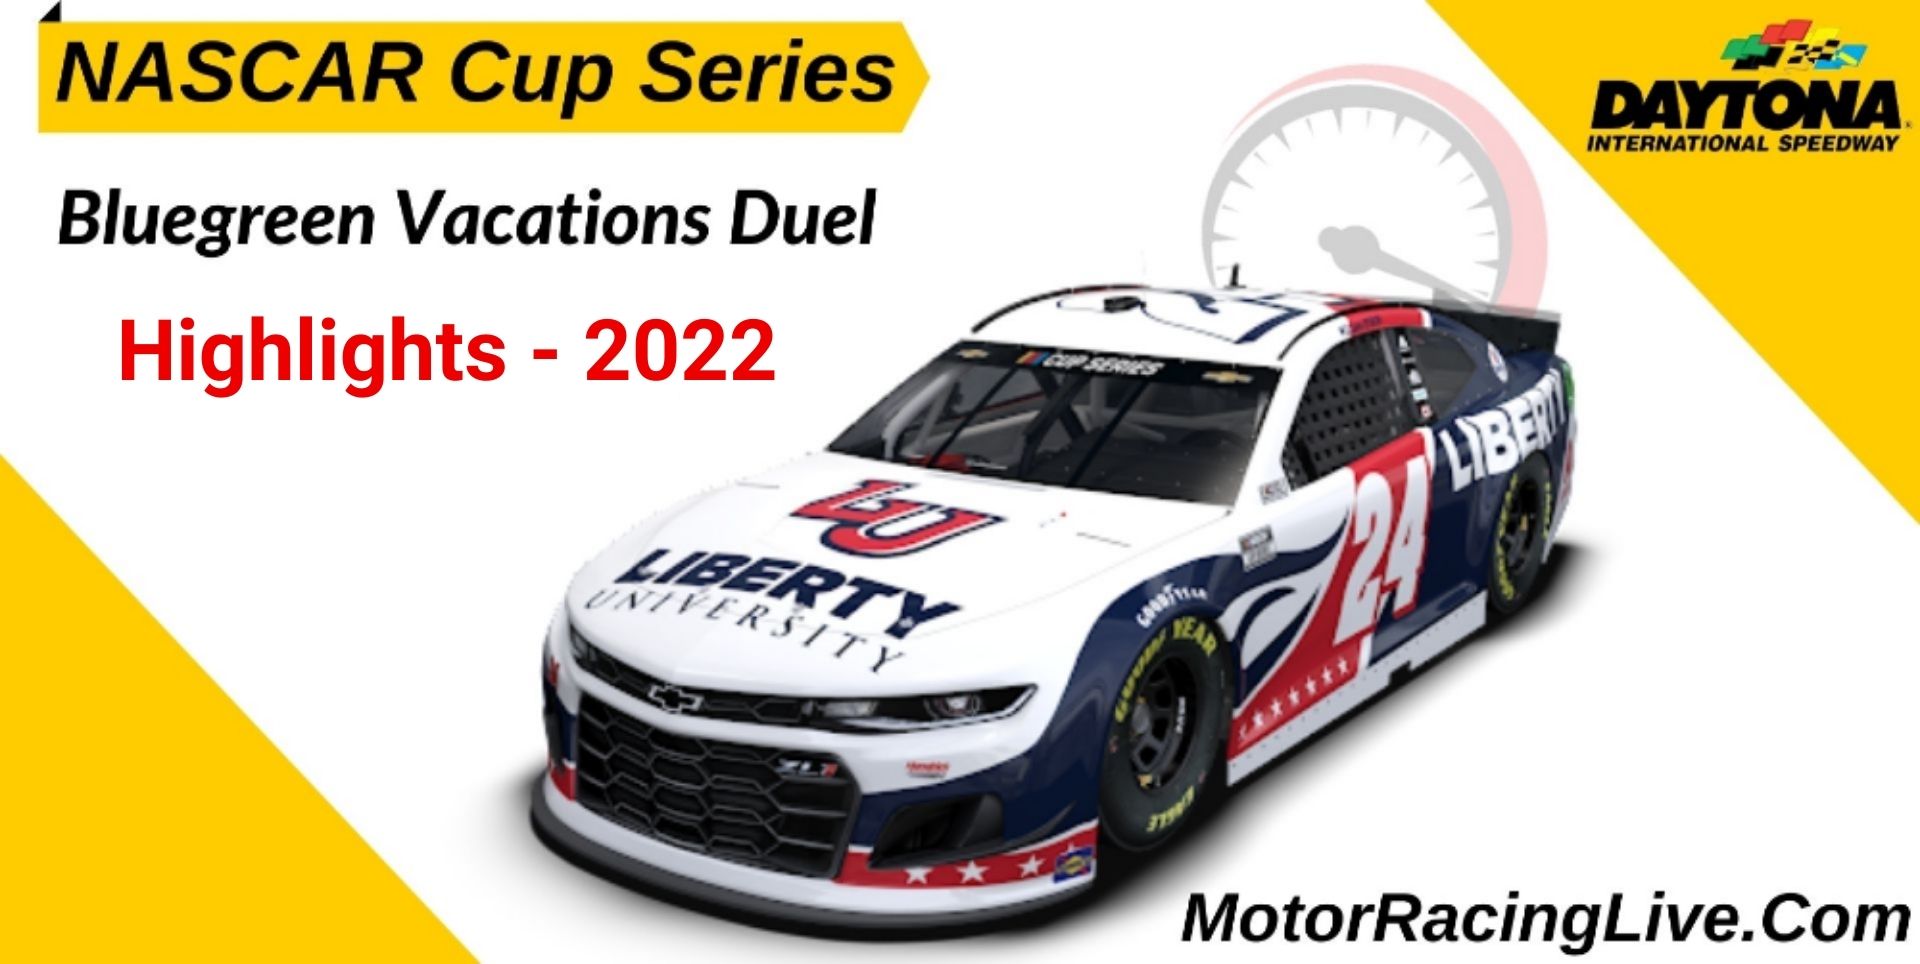 Bluegreen Vacation Duels Highlights 2022 NASCAR Cup Series